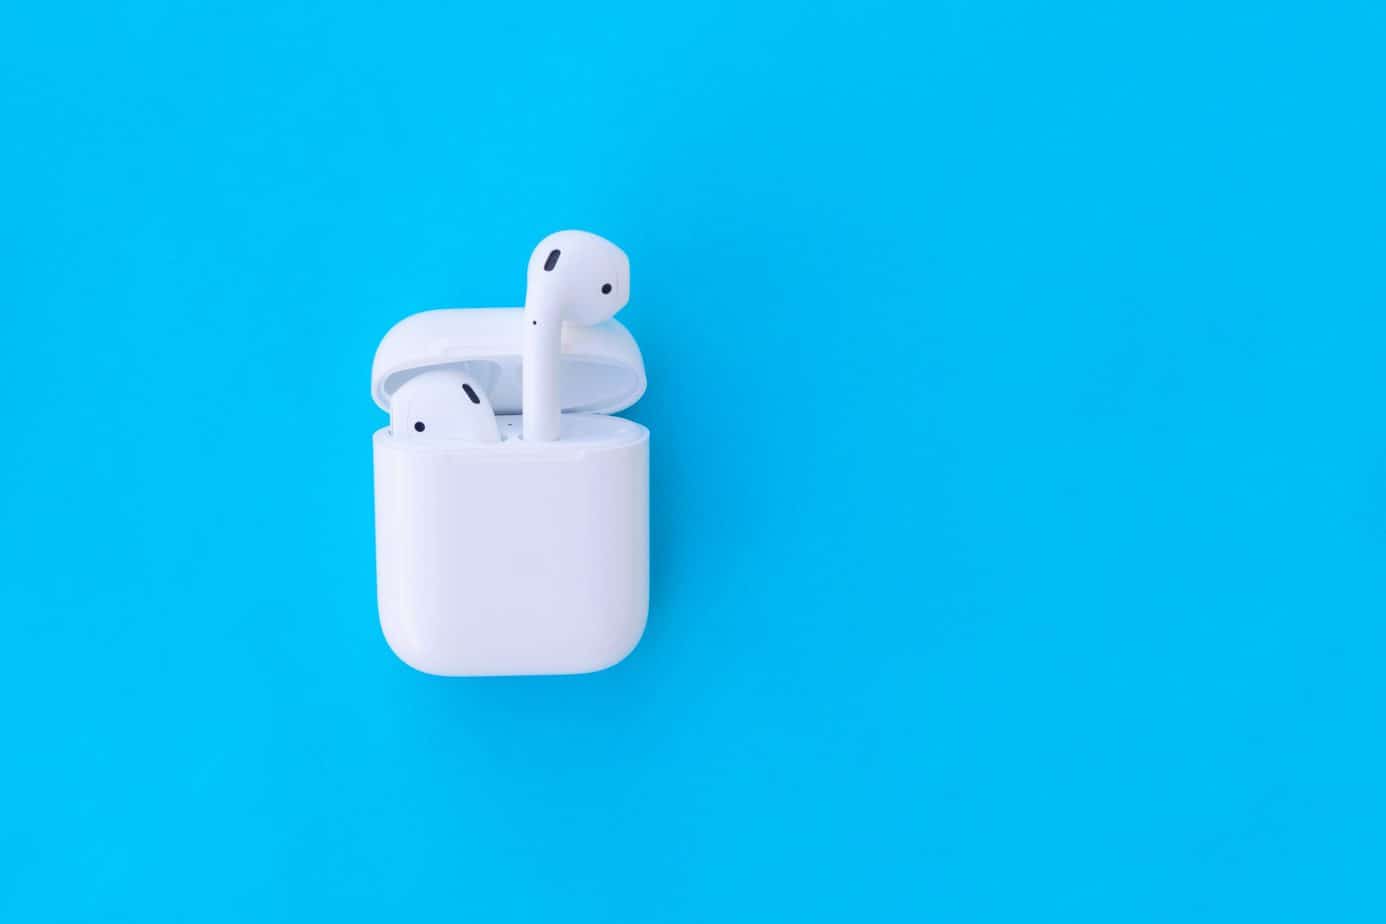 How Long Do AirPods Take To Charge From Dead?